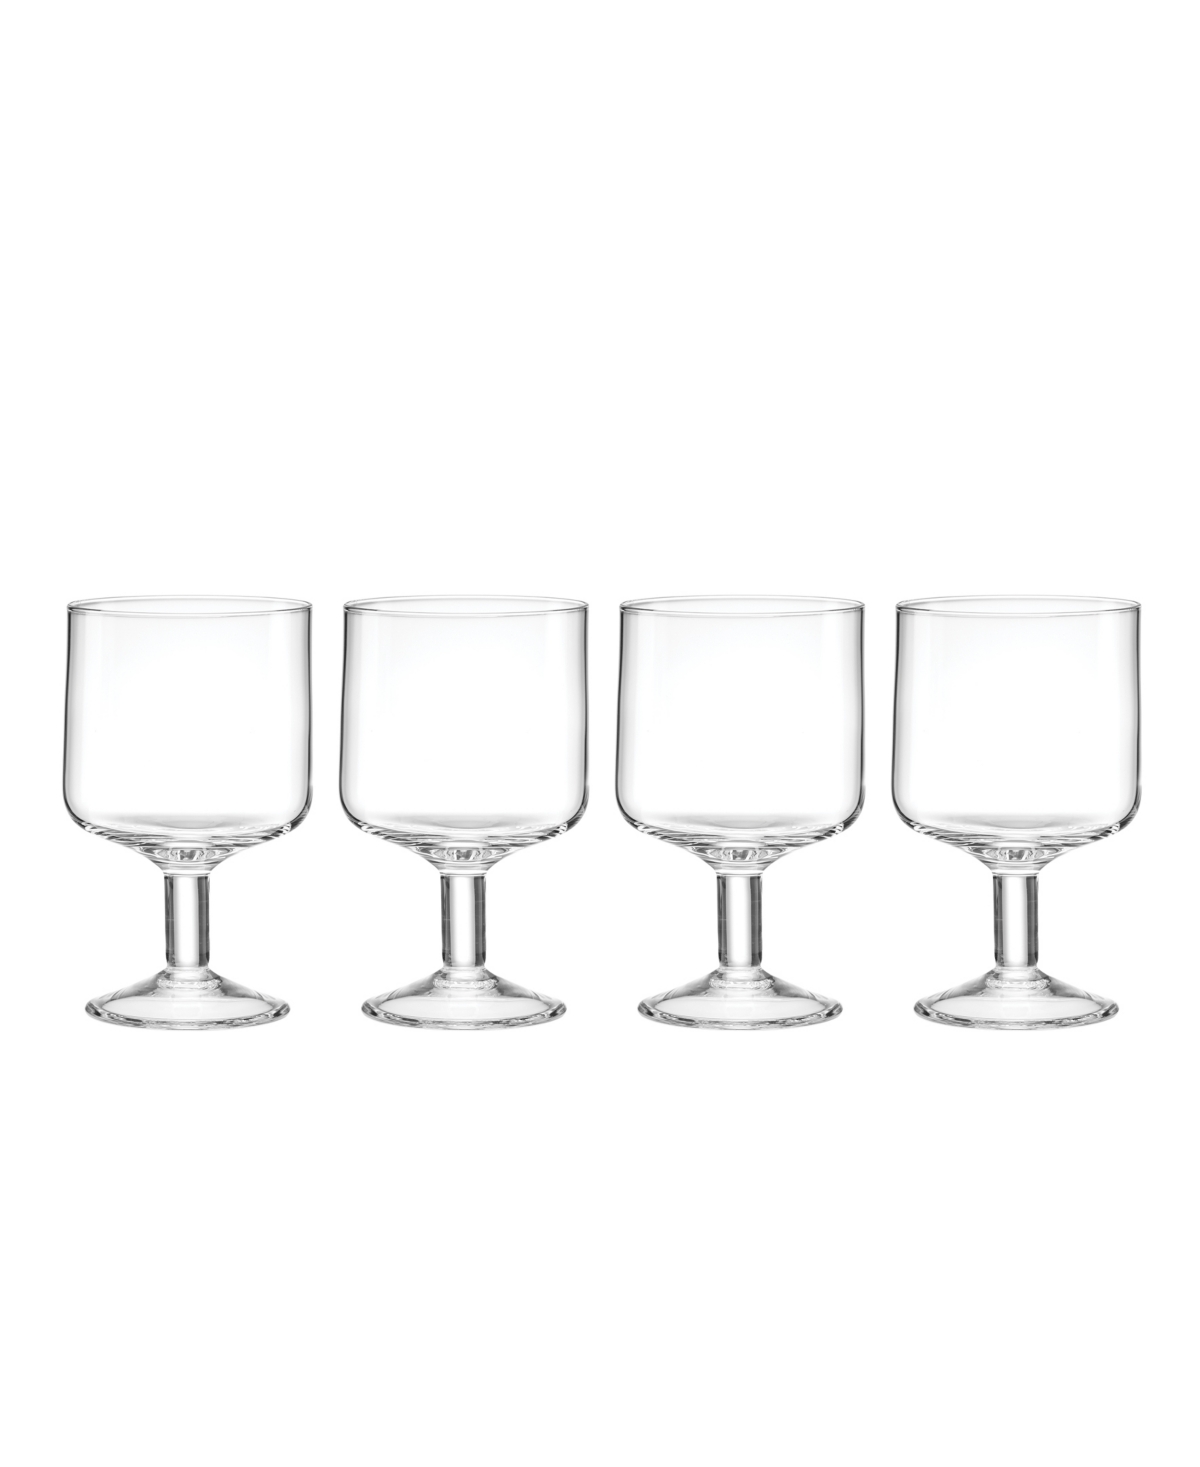 Lenox Tuscany Classics Stackable Stem Wine Glasses, Set Of 4 In Clear